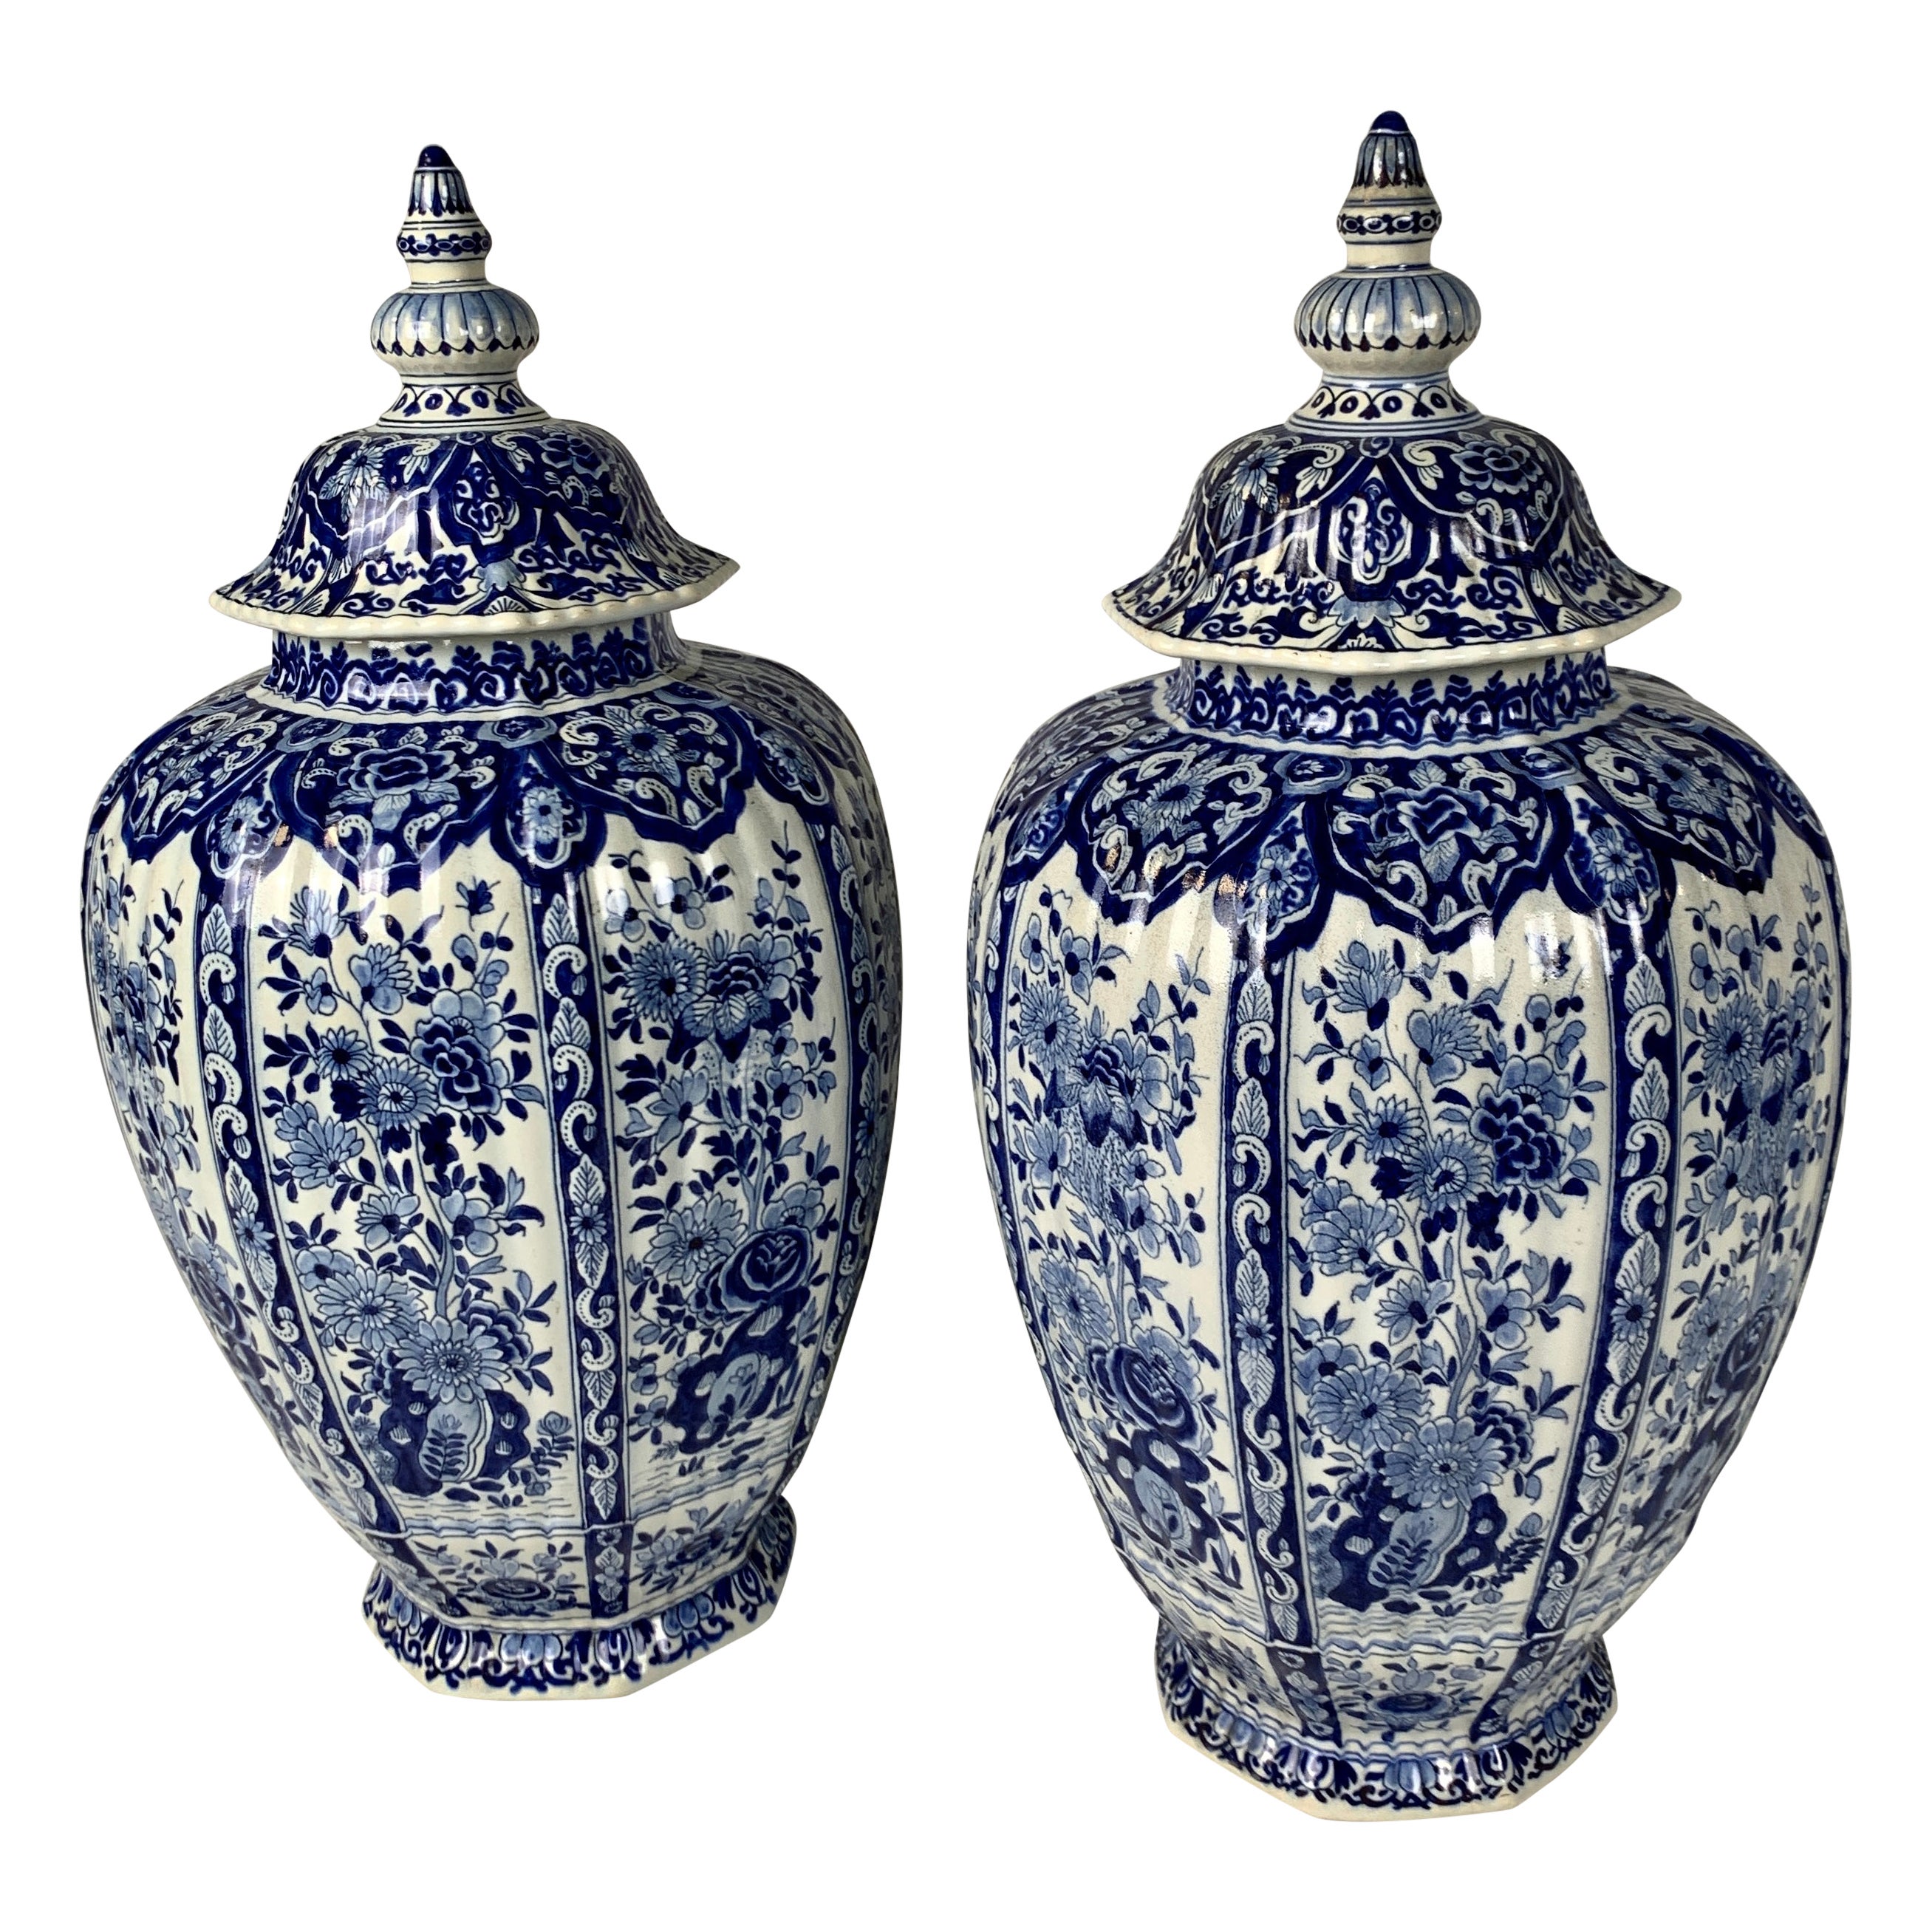 Pair of Large Blue and White Delft Jars Decorated with Flowers